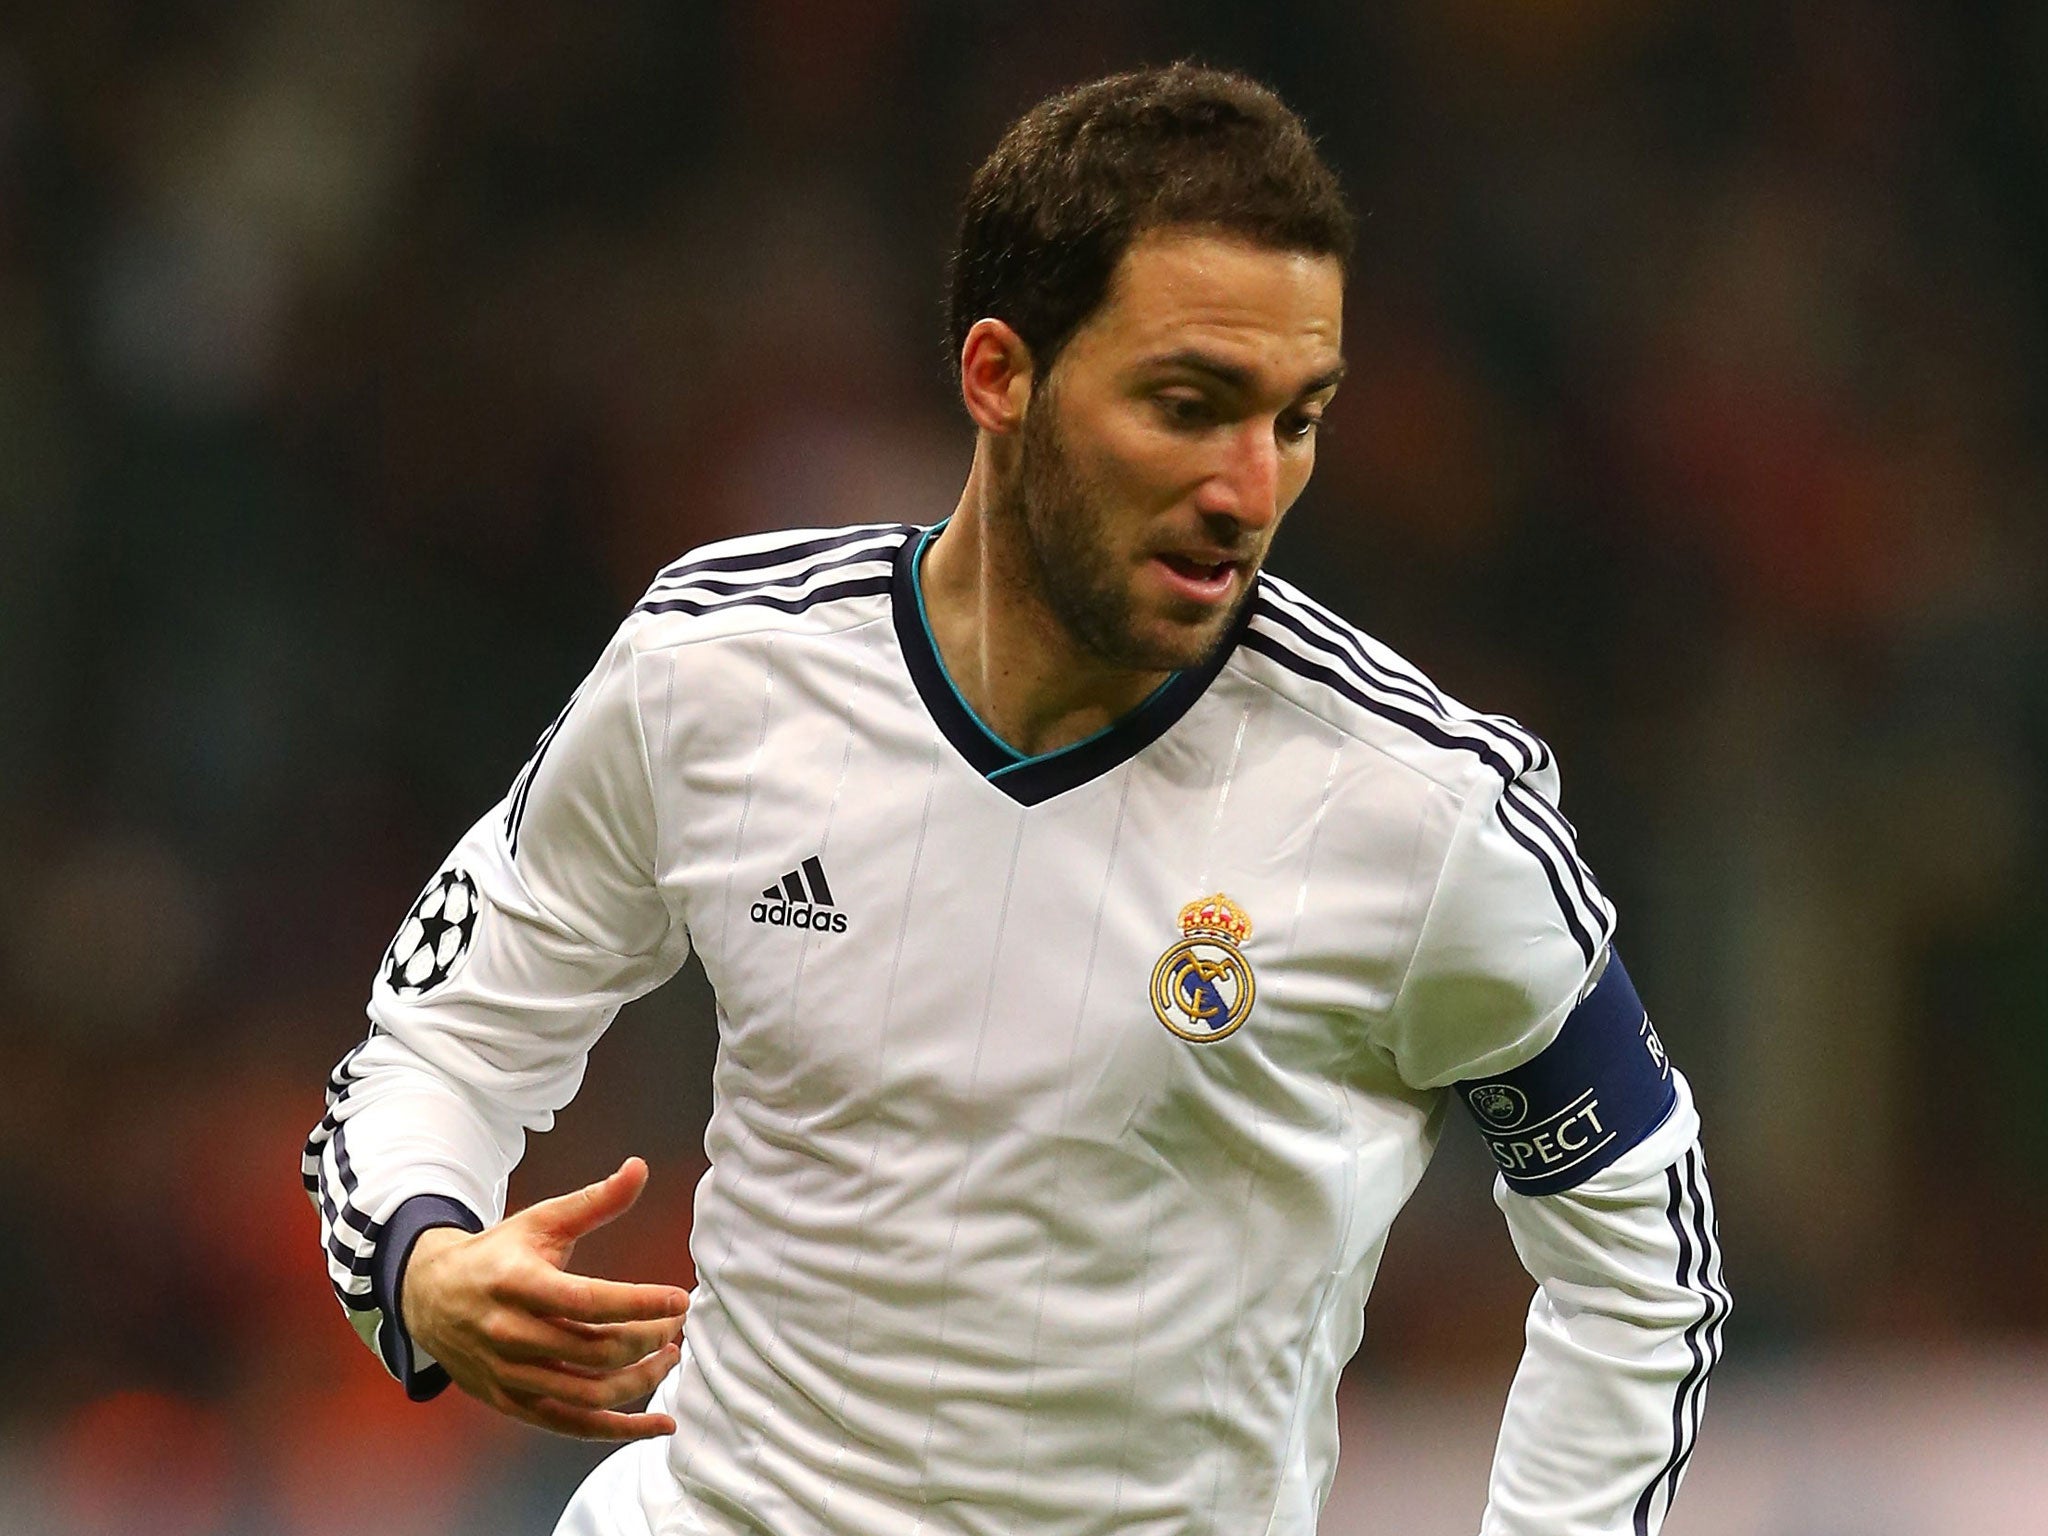 Florentino Perez, has dismissed speculation that Gonzalo Higuain (pictured) is about to join Arsenal